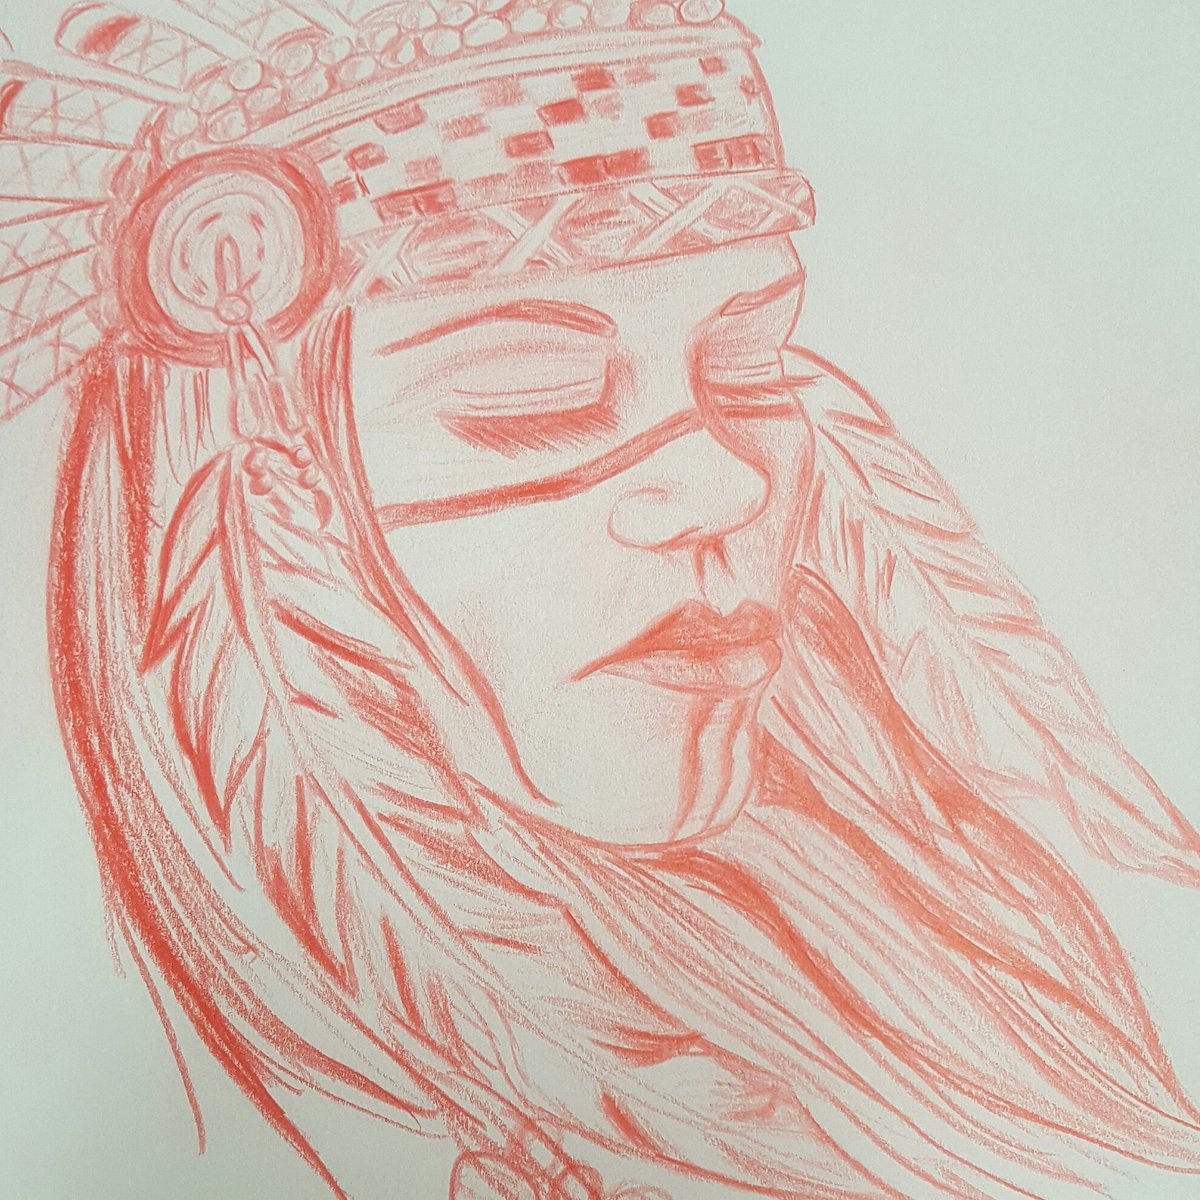 Howlart On Twitter All Red Sketch Of An Indian Girl